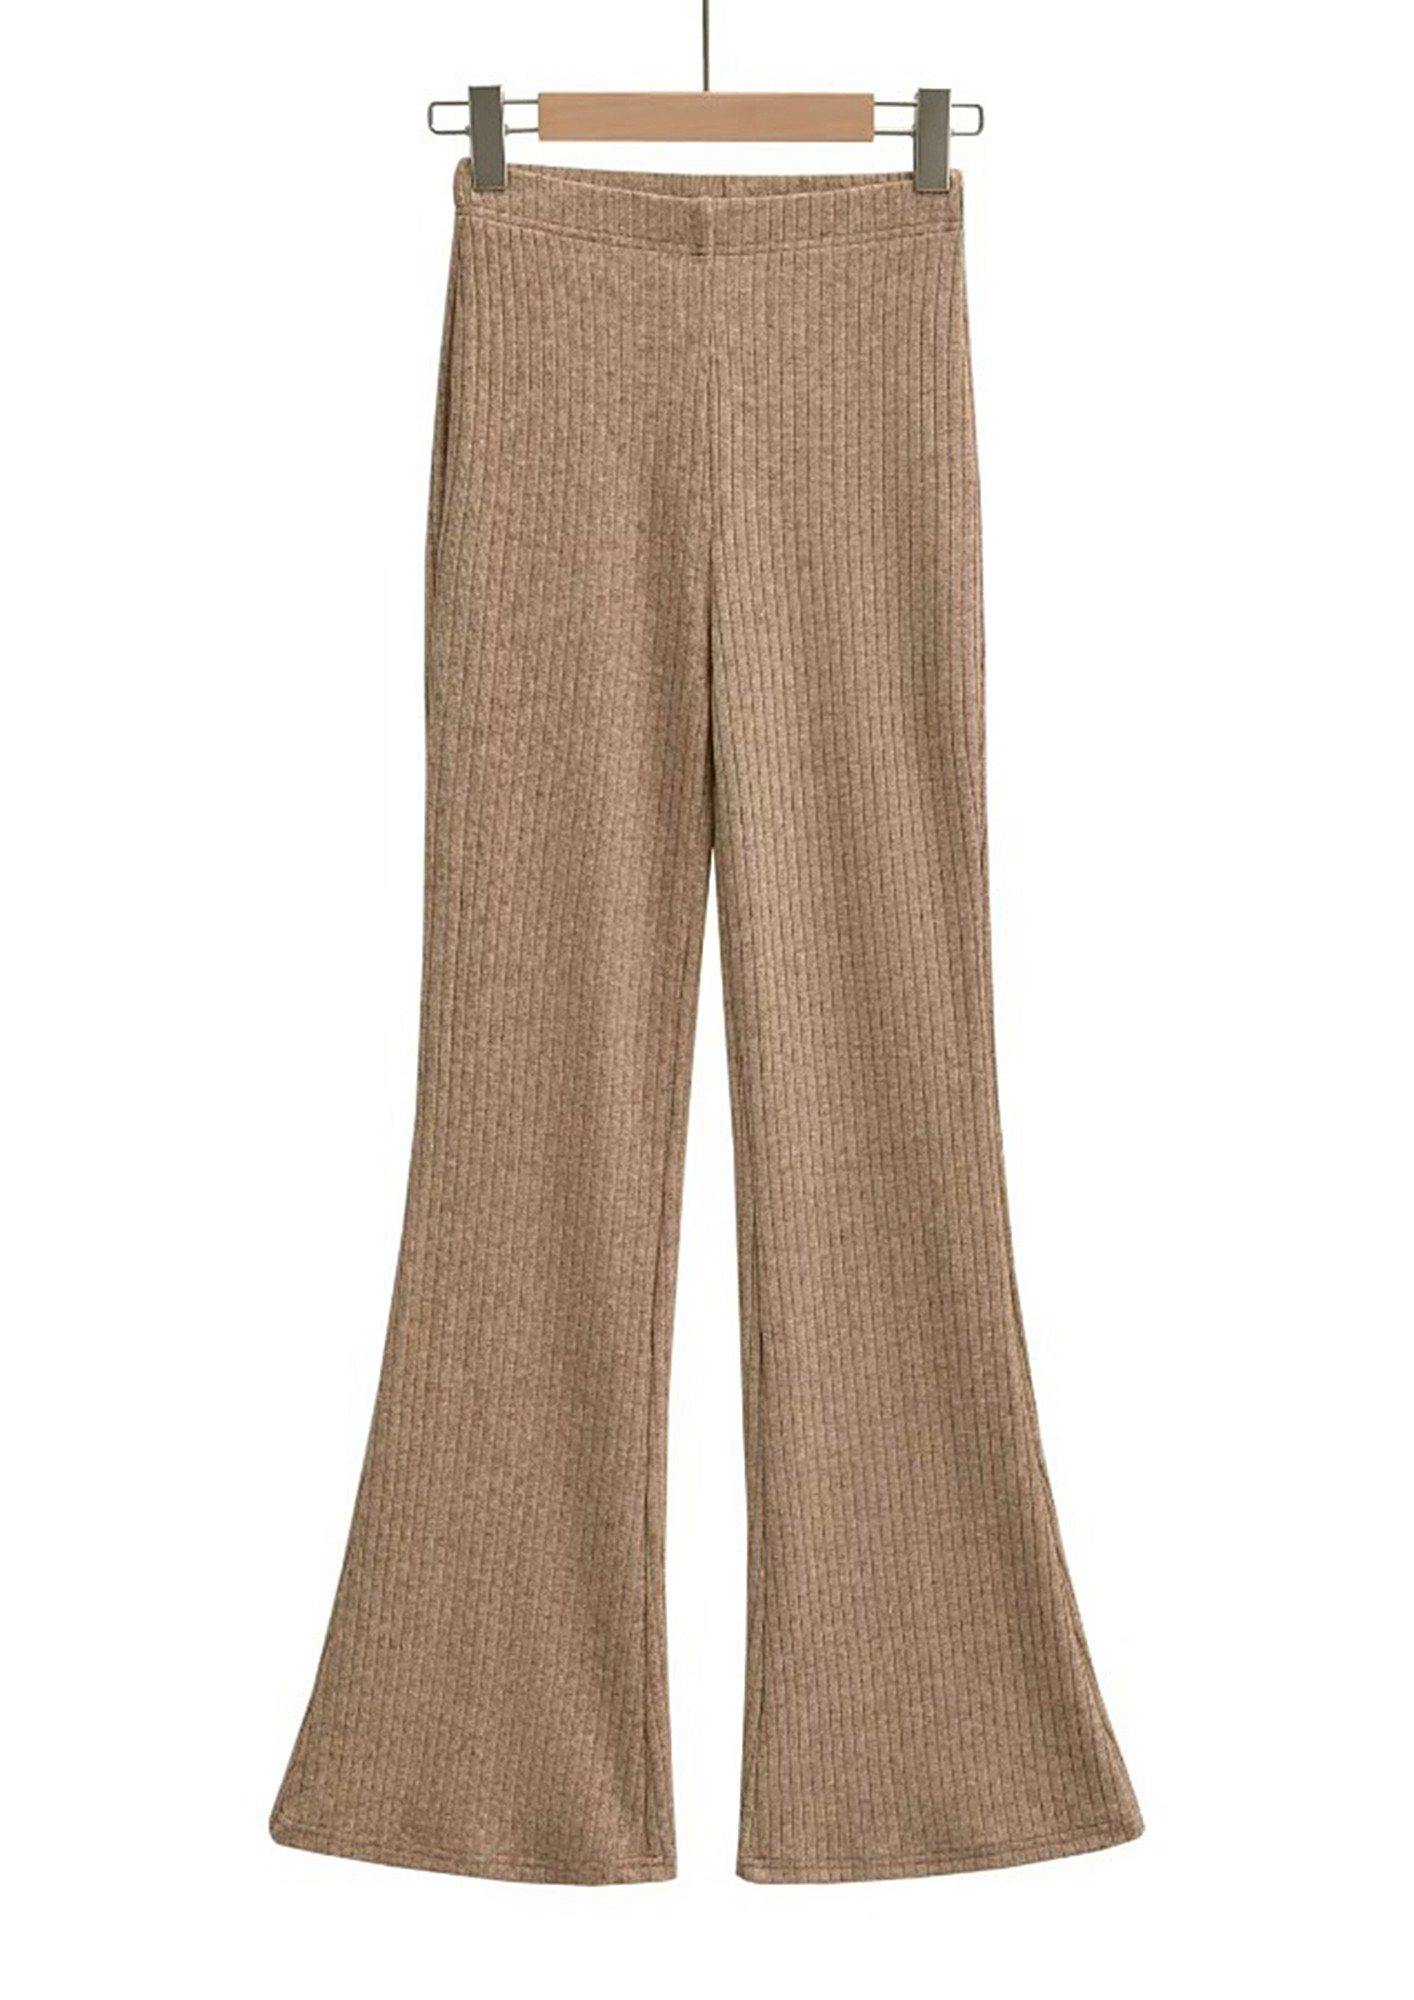 Buy Khaki Trousers Online in India at Best Price - Westside